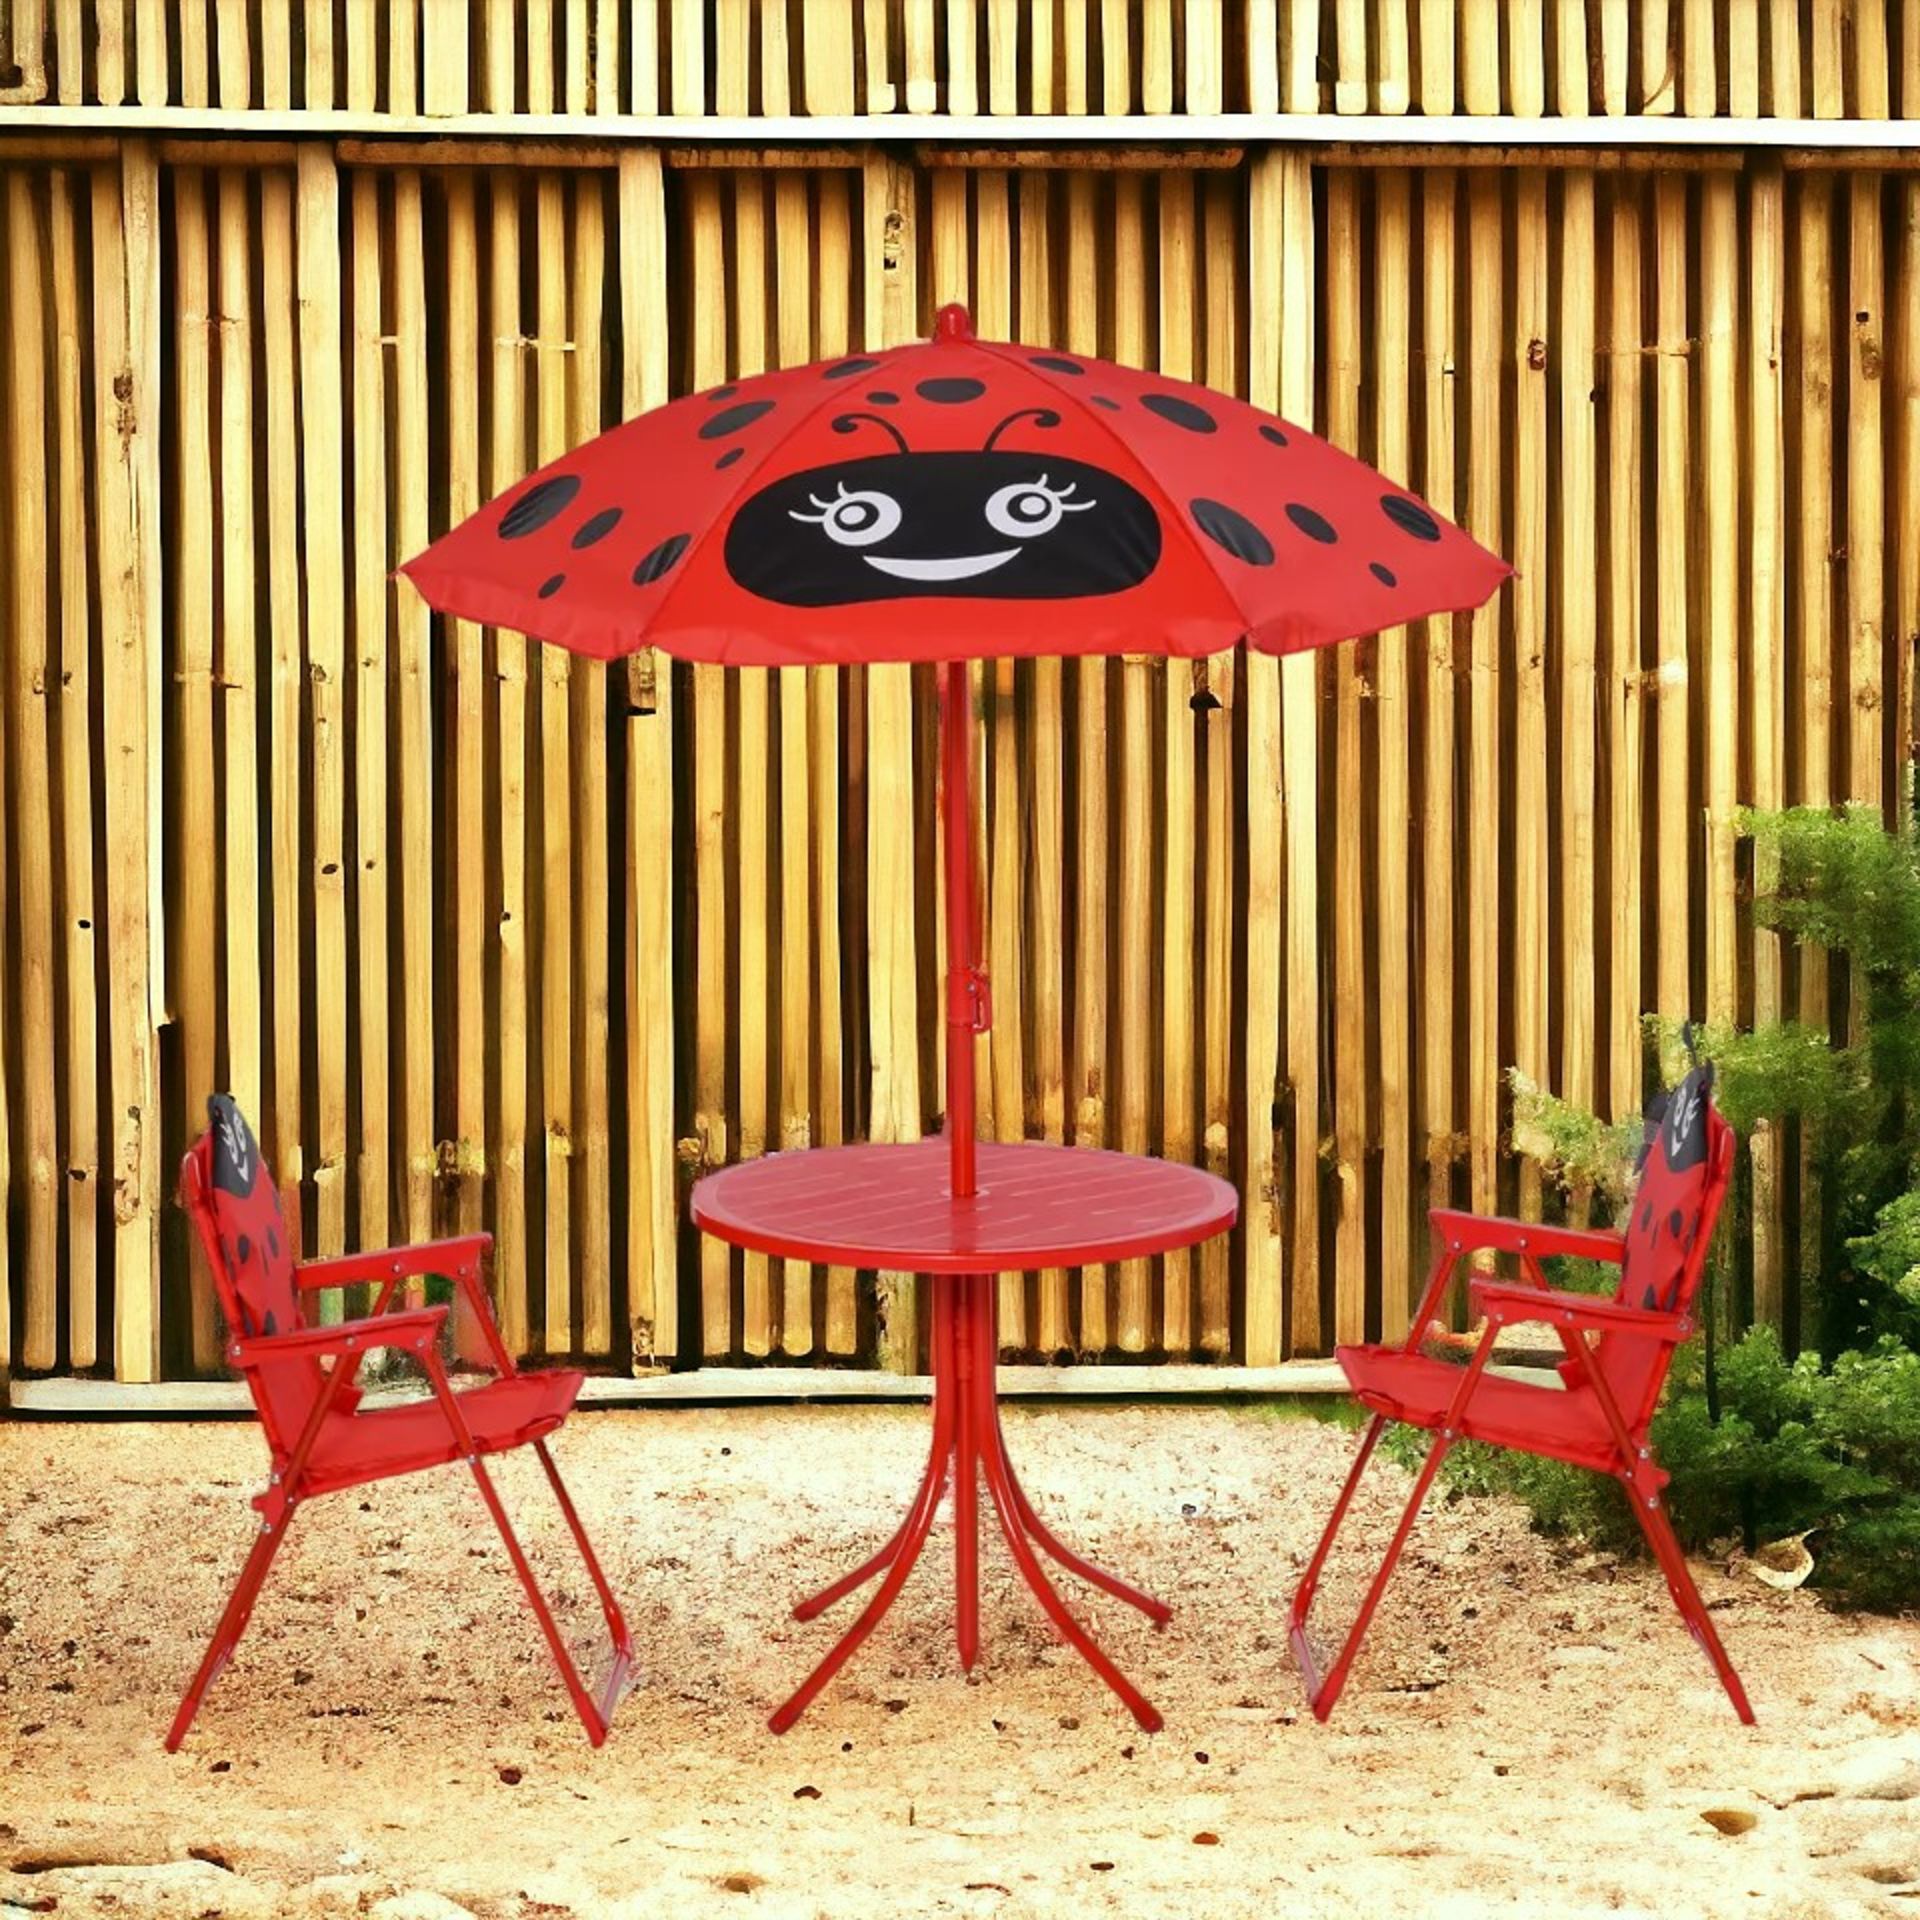 FREE DELIVERY - BRAND NEW KIDS FOLDING PICNIC TABLE CHAIR SET LADYBUG PATTERN OUTDOOR - Bild 2 aus 2